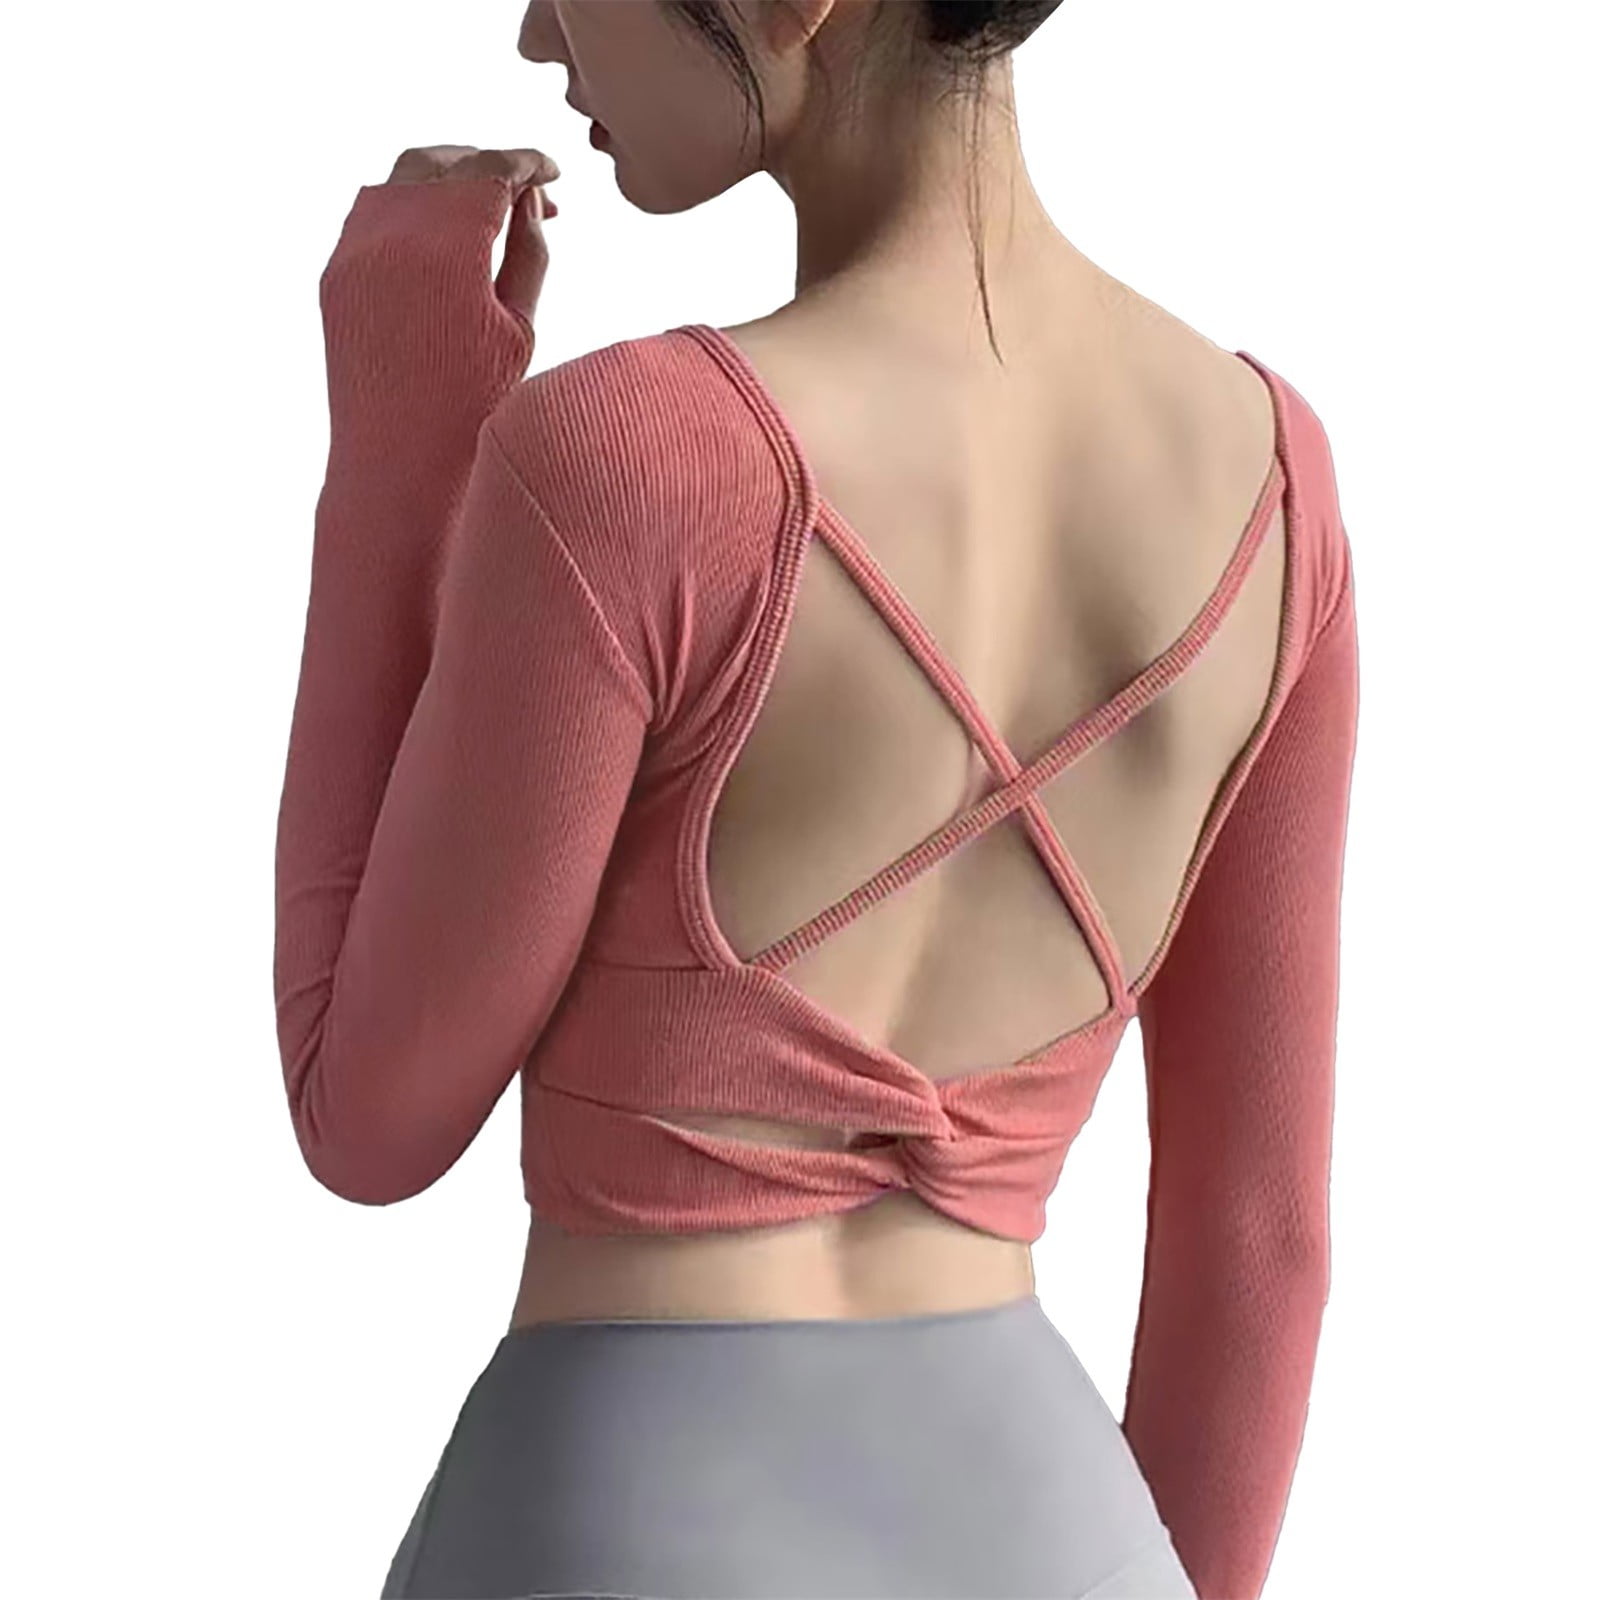 LBECLEY Target Brand Sports Bra Long Sleeved Yoga Clothes Top